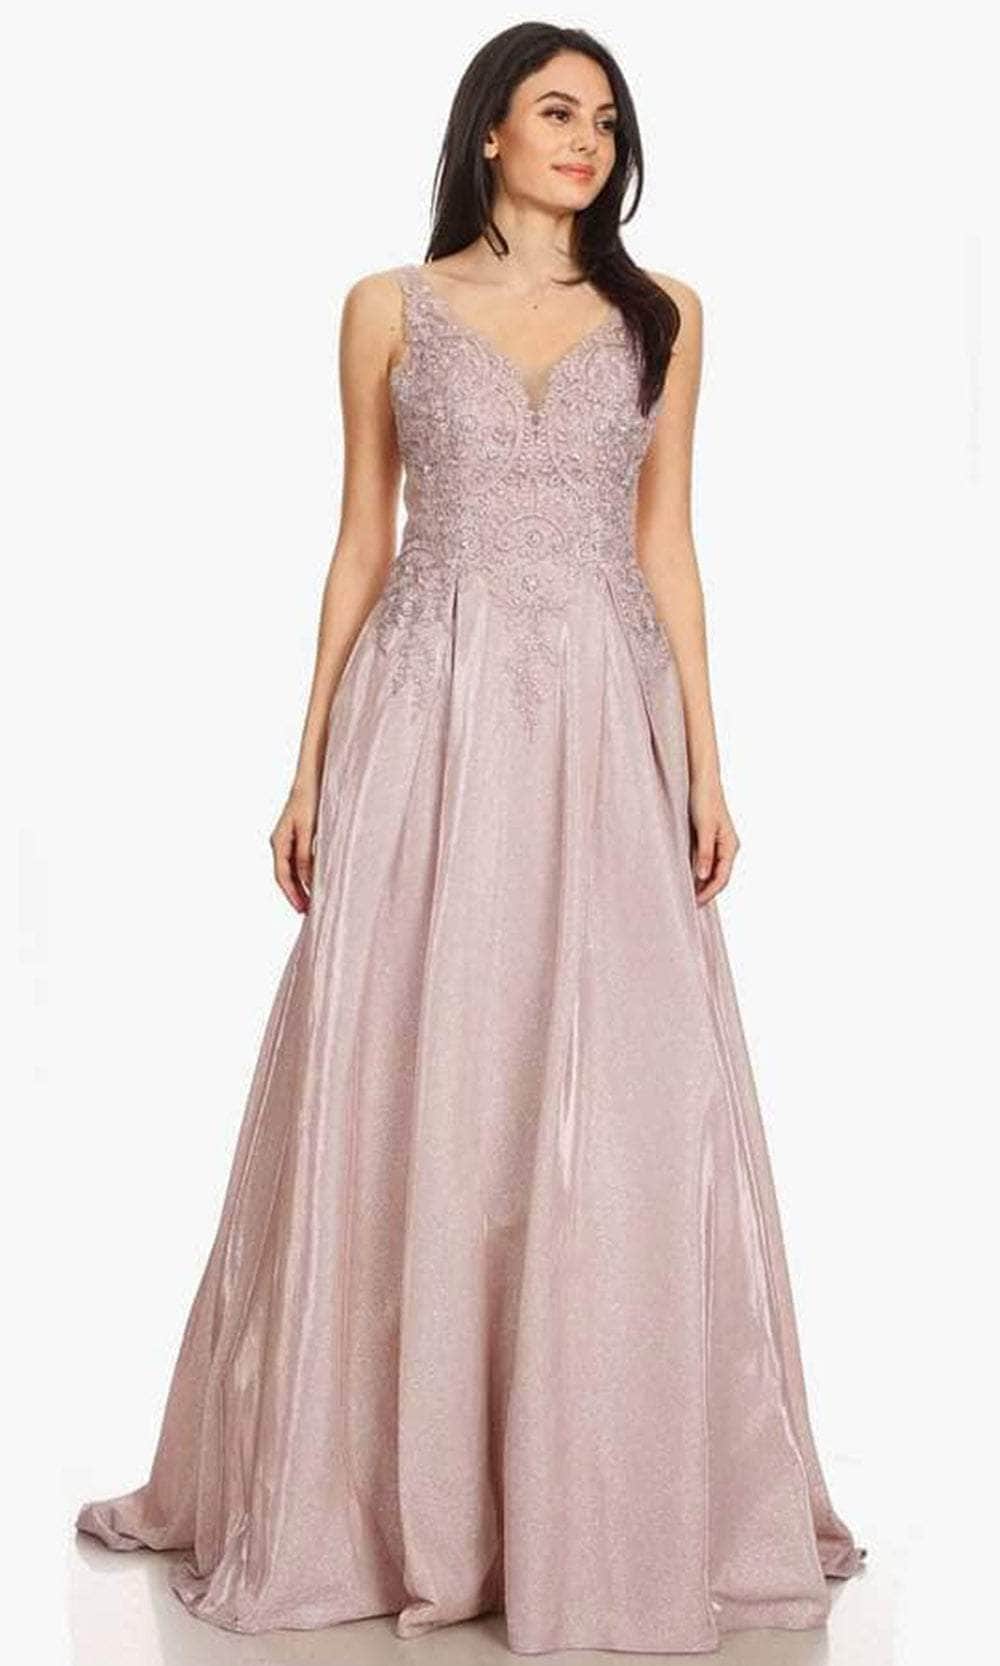 Eureka Fashion 9606 - Embroidered Bodice A-Line Gown